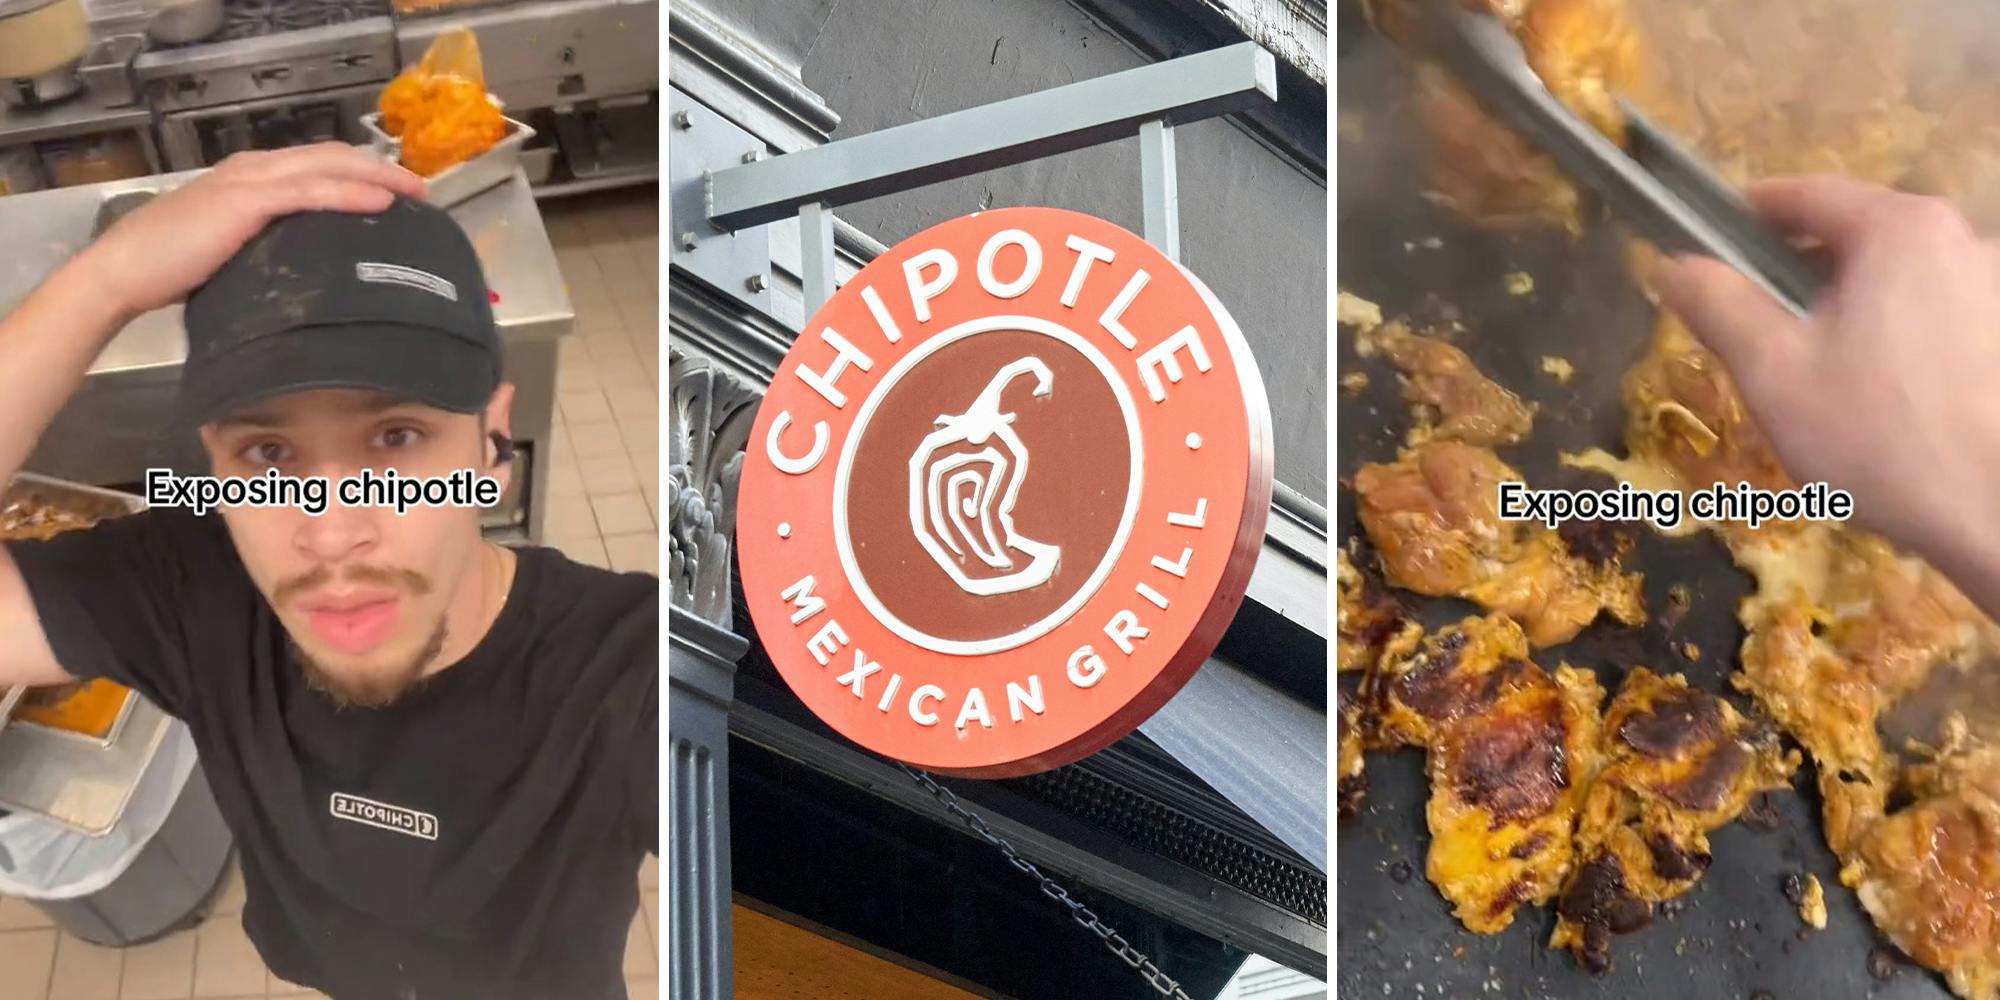 Chipotle worker tries to expose its barbacoa.